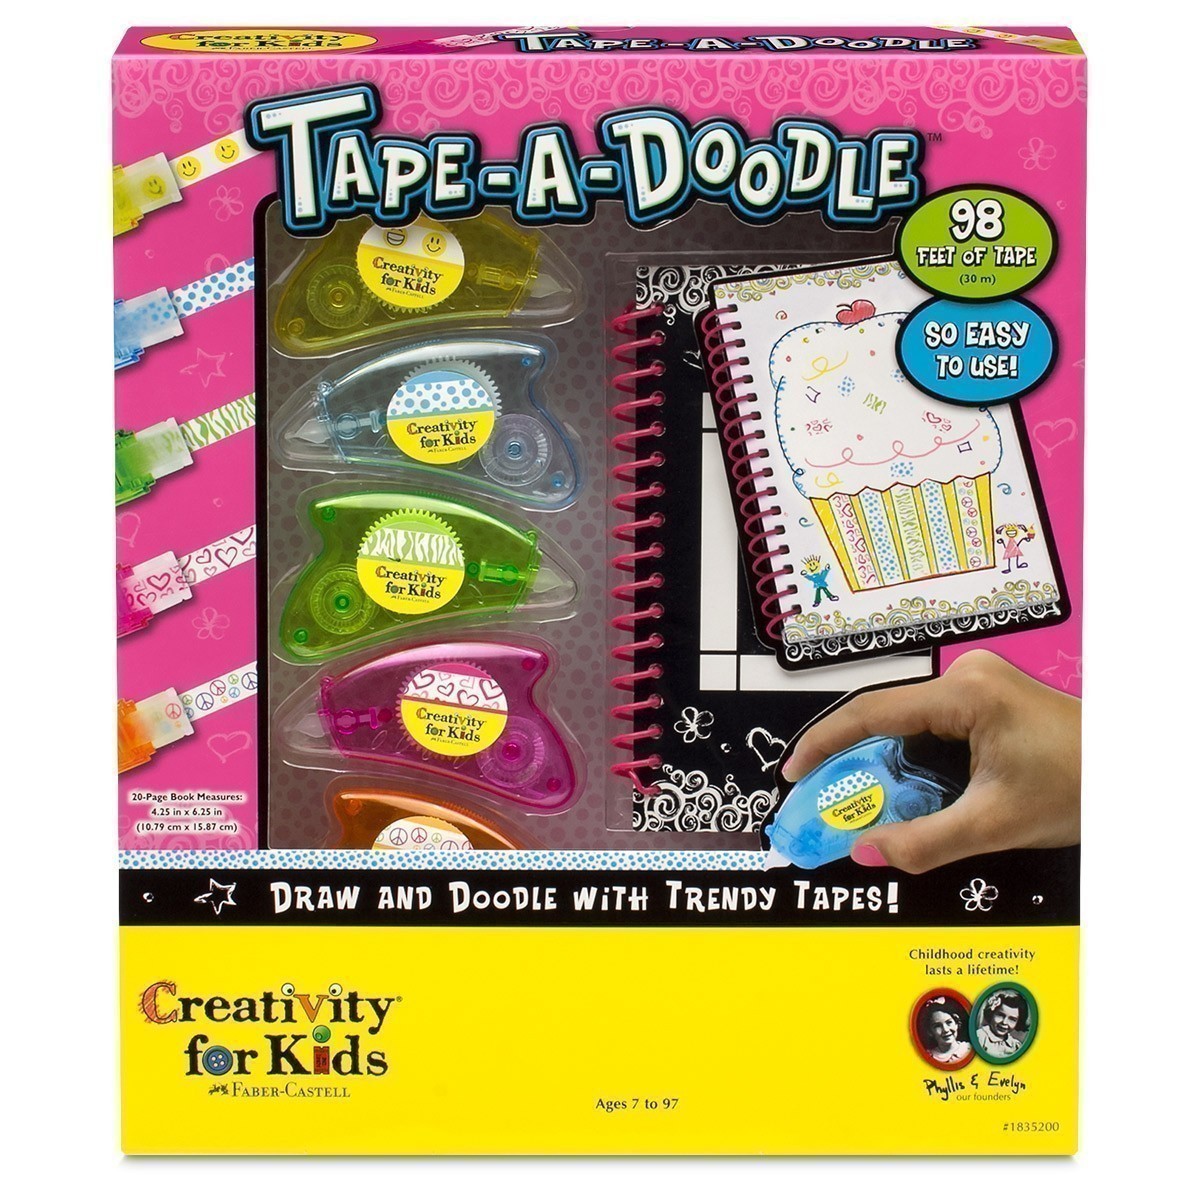 Creativity for Kids - Tape-A-Doodle